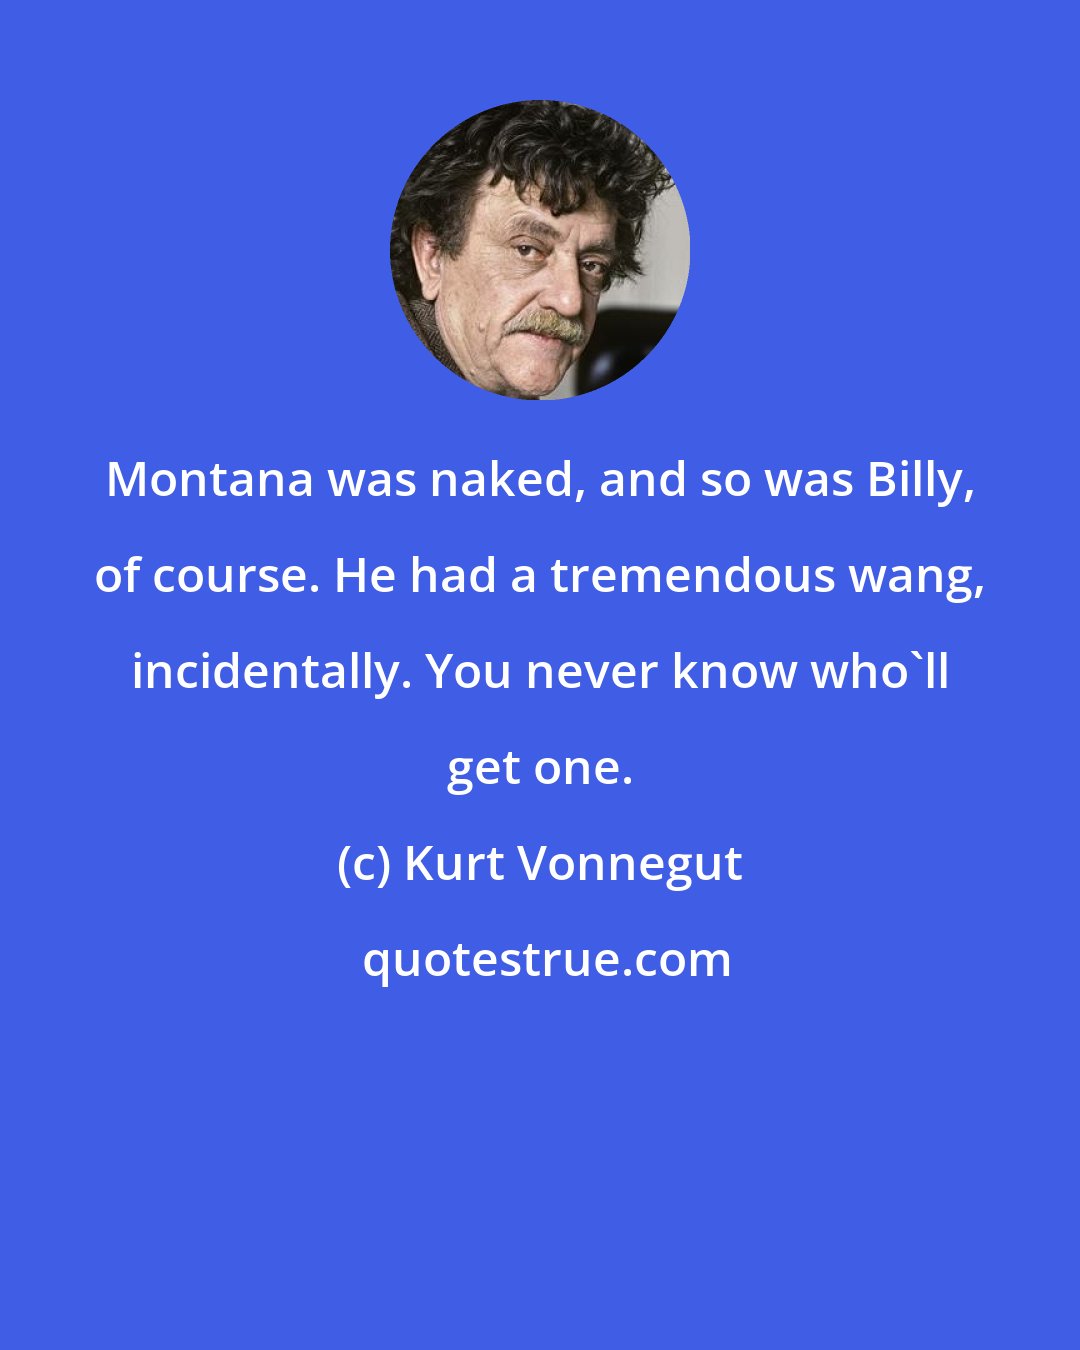 Kurt Vonnegut: Montana was naked, and so was Billy, of course. He had a tremendous wang, incidentally. You never know who'll get one.